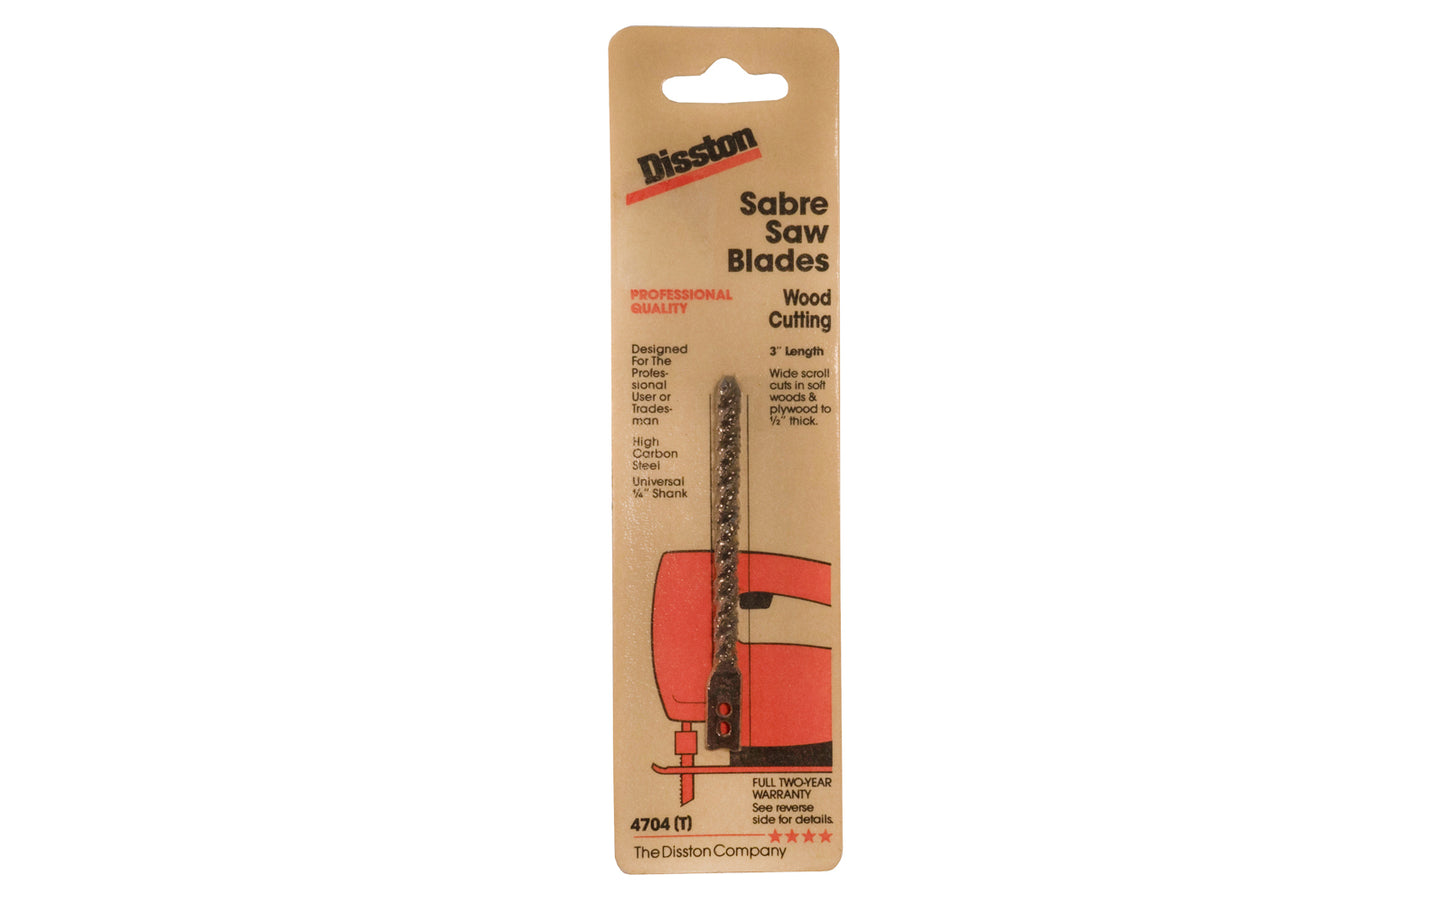 Disston 3" Wood Cutting Sabre Saw Blade. Wide scroll cuts in soft woods & plywood to 1/2" thick. 3" length. Jig saw blade made in West Germany. Model 4704 (T). Made by Disston. 035781180207